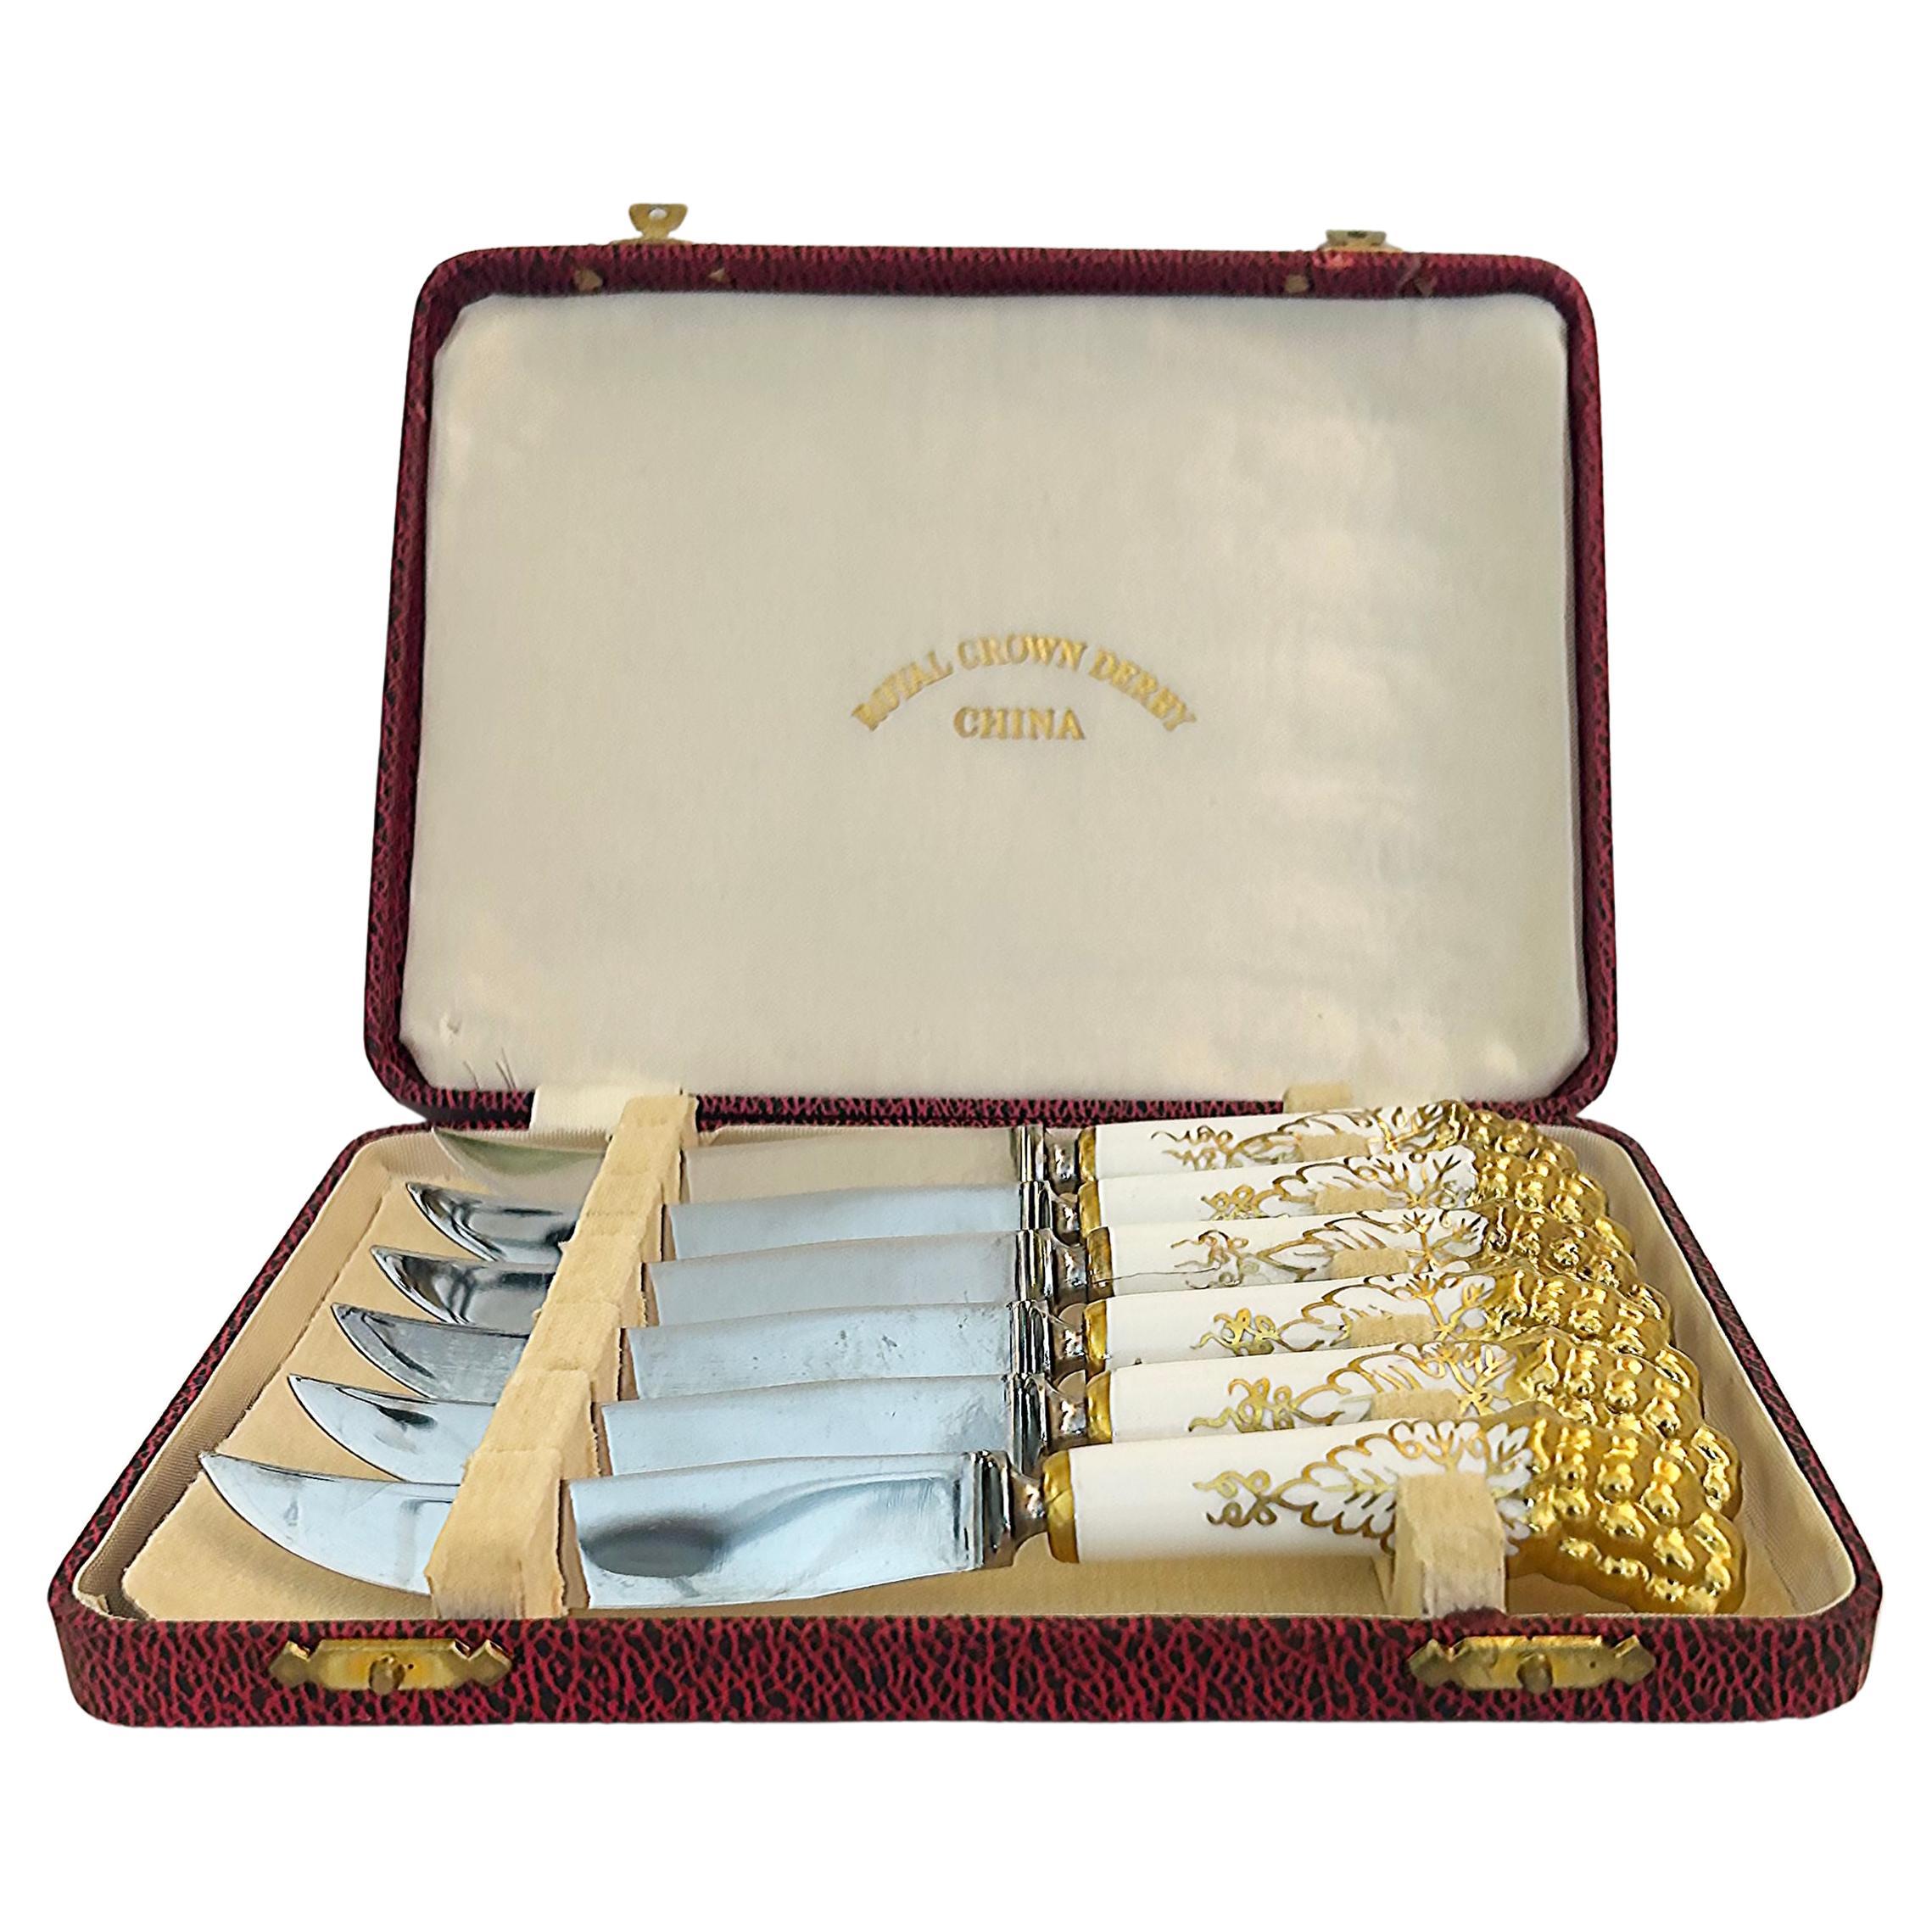 Royal Crown Derby Porcelain, Stainless Fruit Knives Set, Grapes, Leather Box